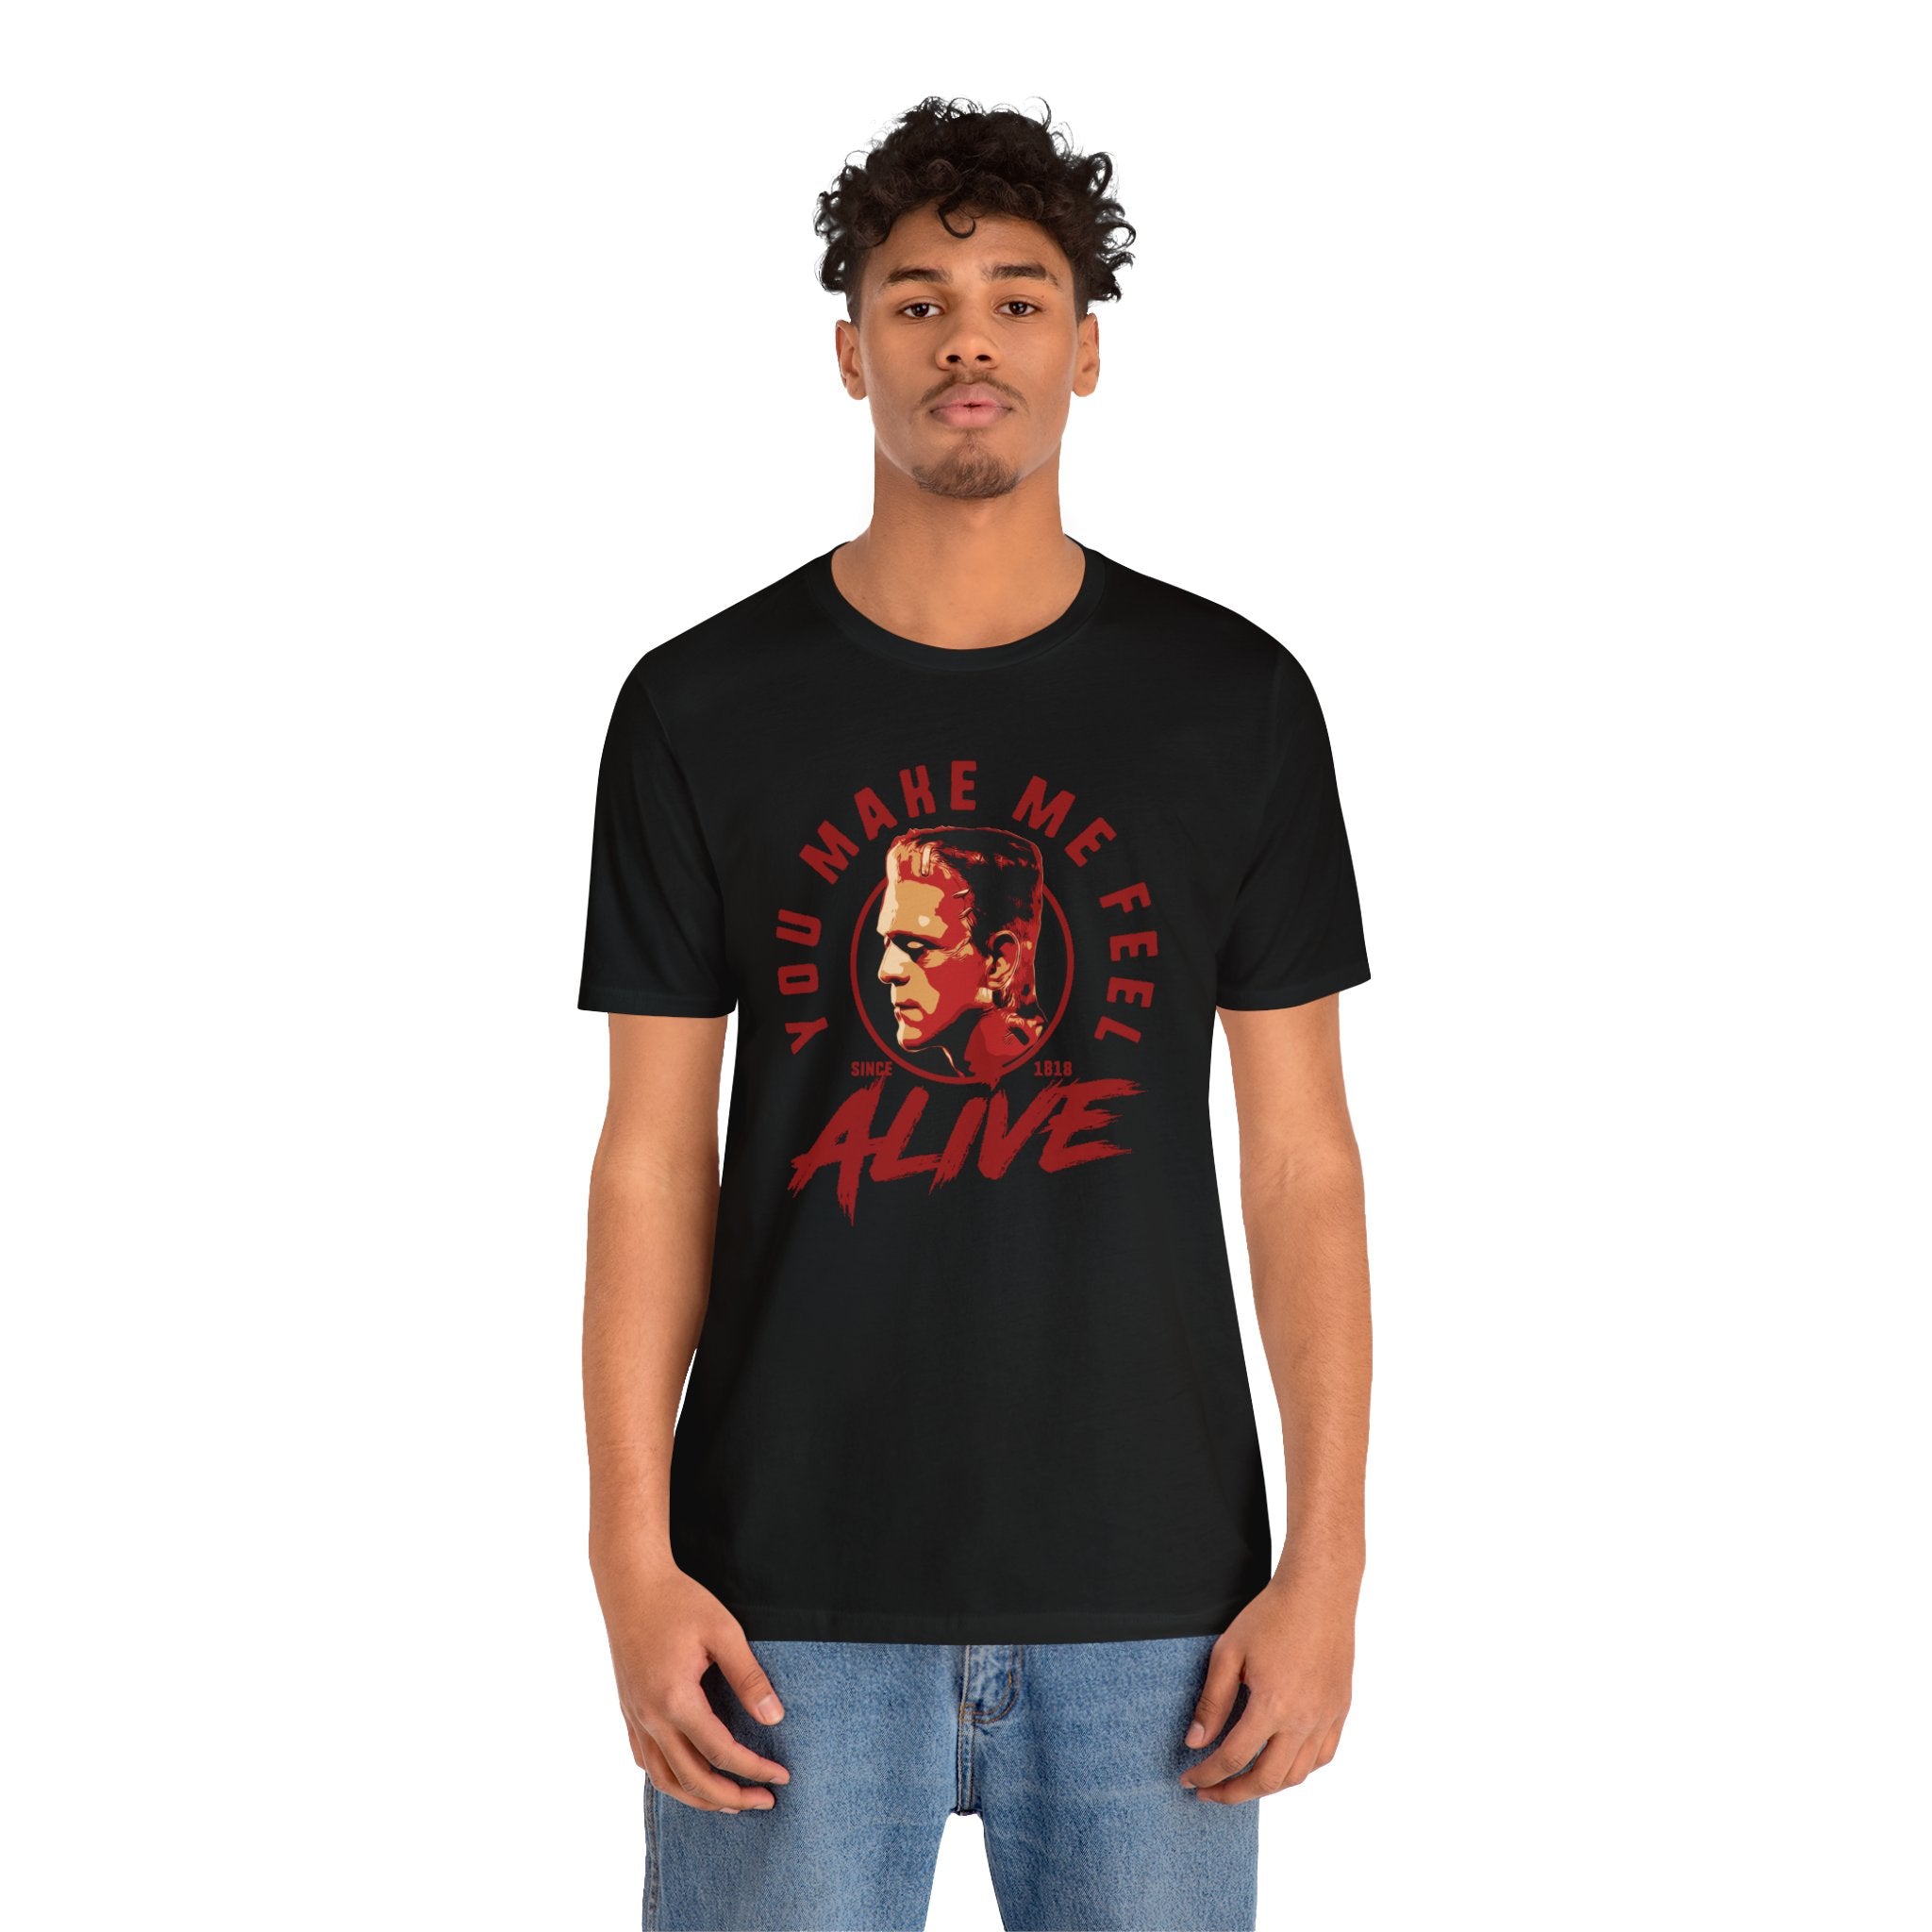 A young man with curly hair wearing a black unisex tee with a red and white "You Make Me Feel Alive" print design and text, paired with blue jeans, standing against a white background.